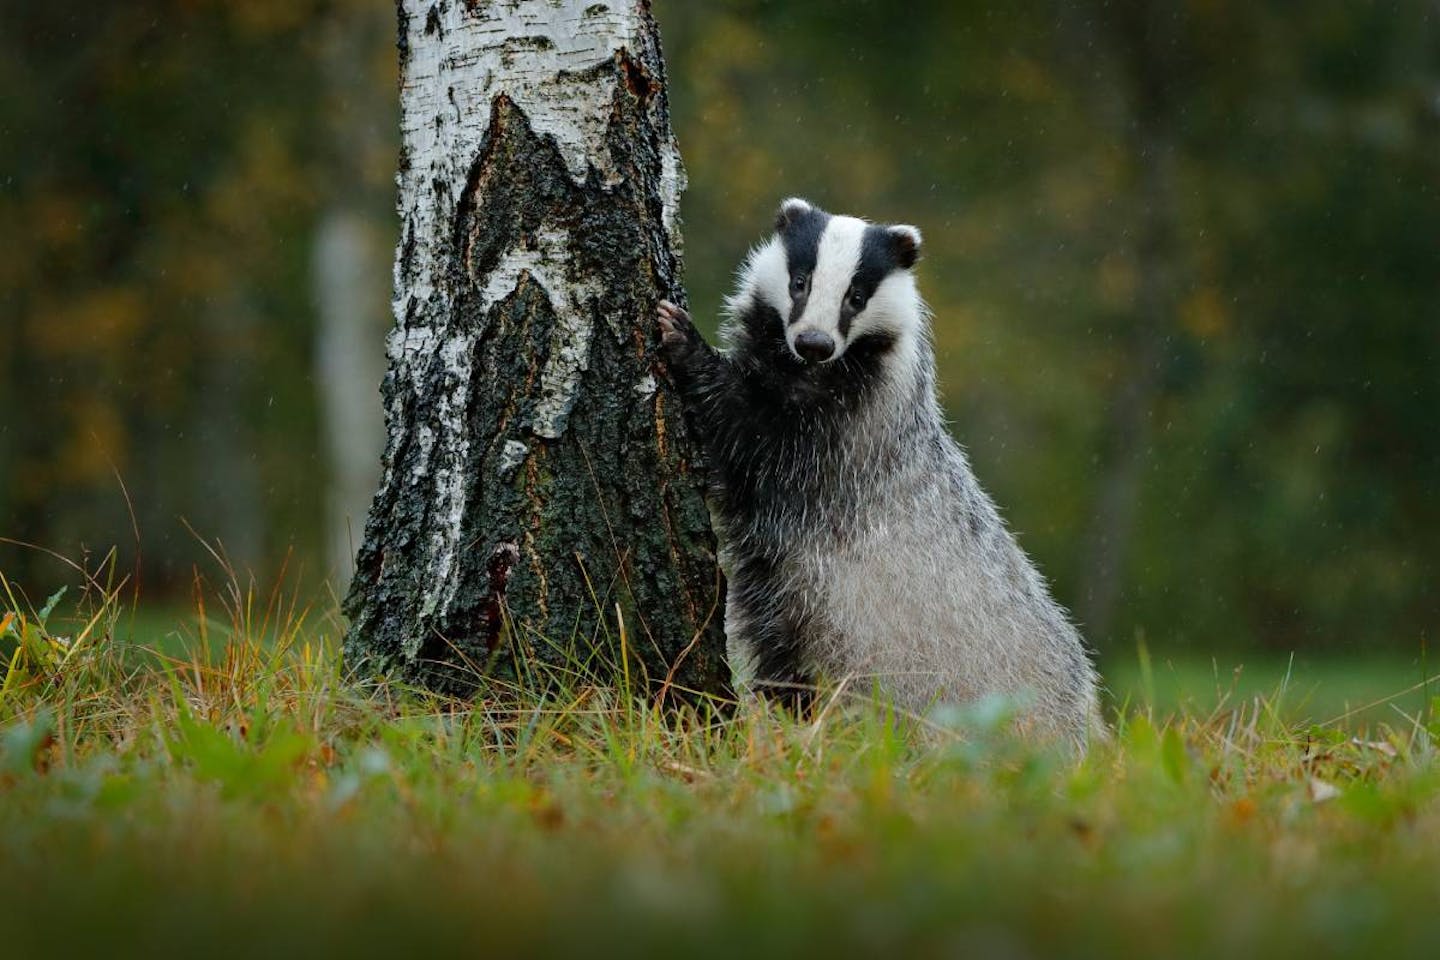 Eurasian badgers: distinguished-looking predators that keep the forest balanced